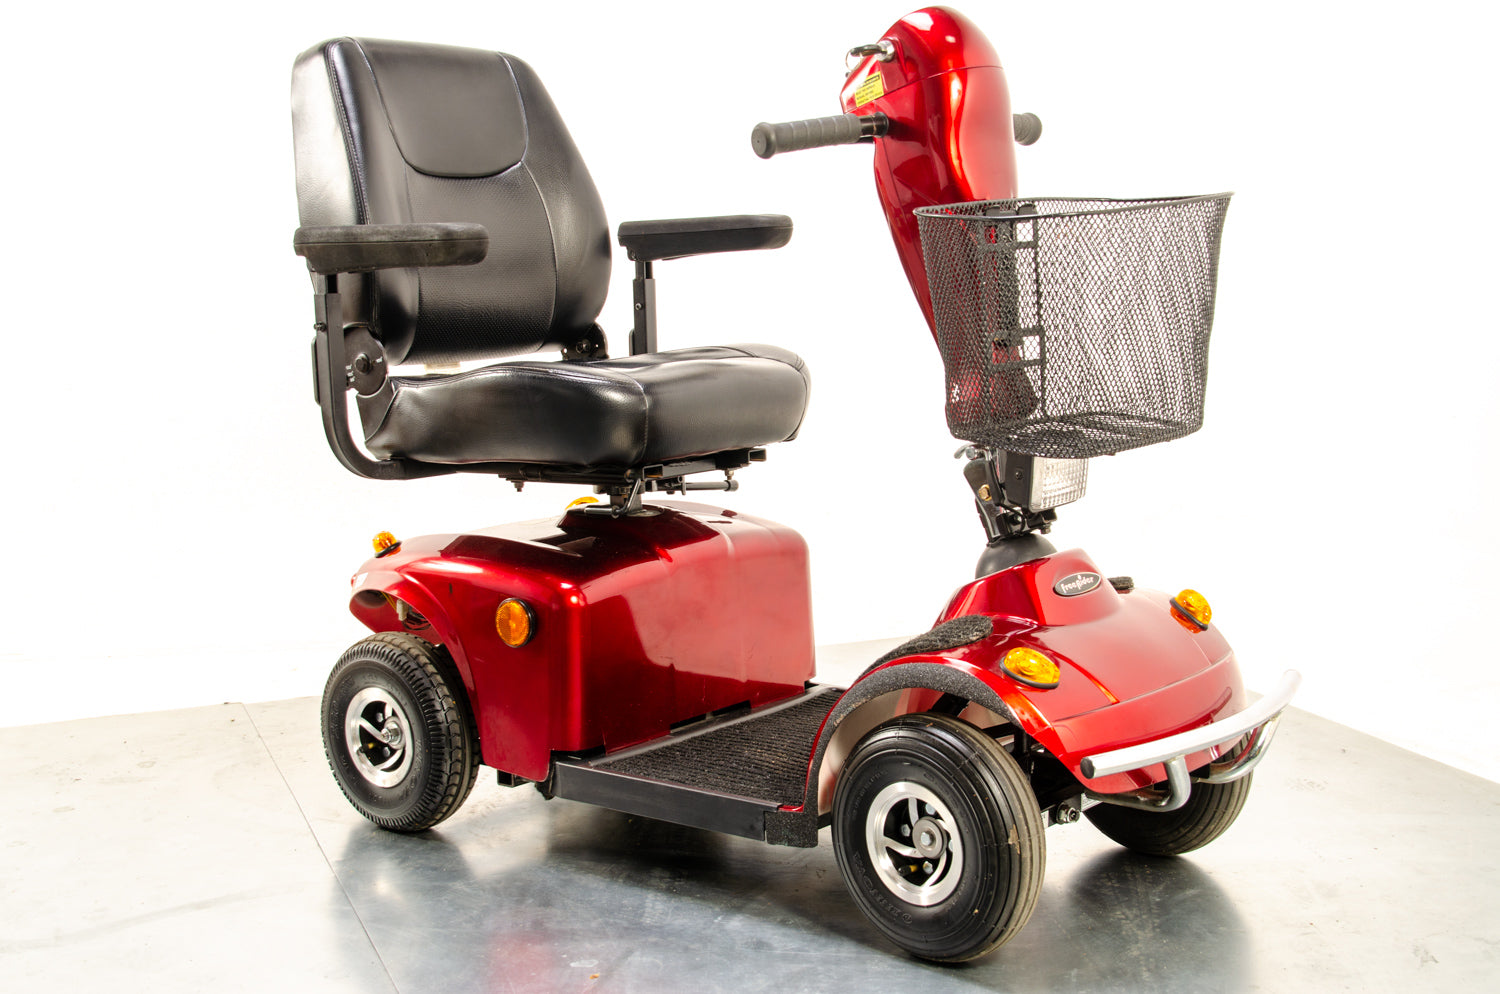 Freerider Mayfair 4 All-Terrain Used Mobility Scooter 4mph Red Pavement